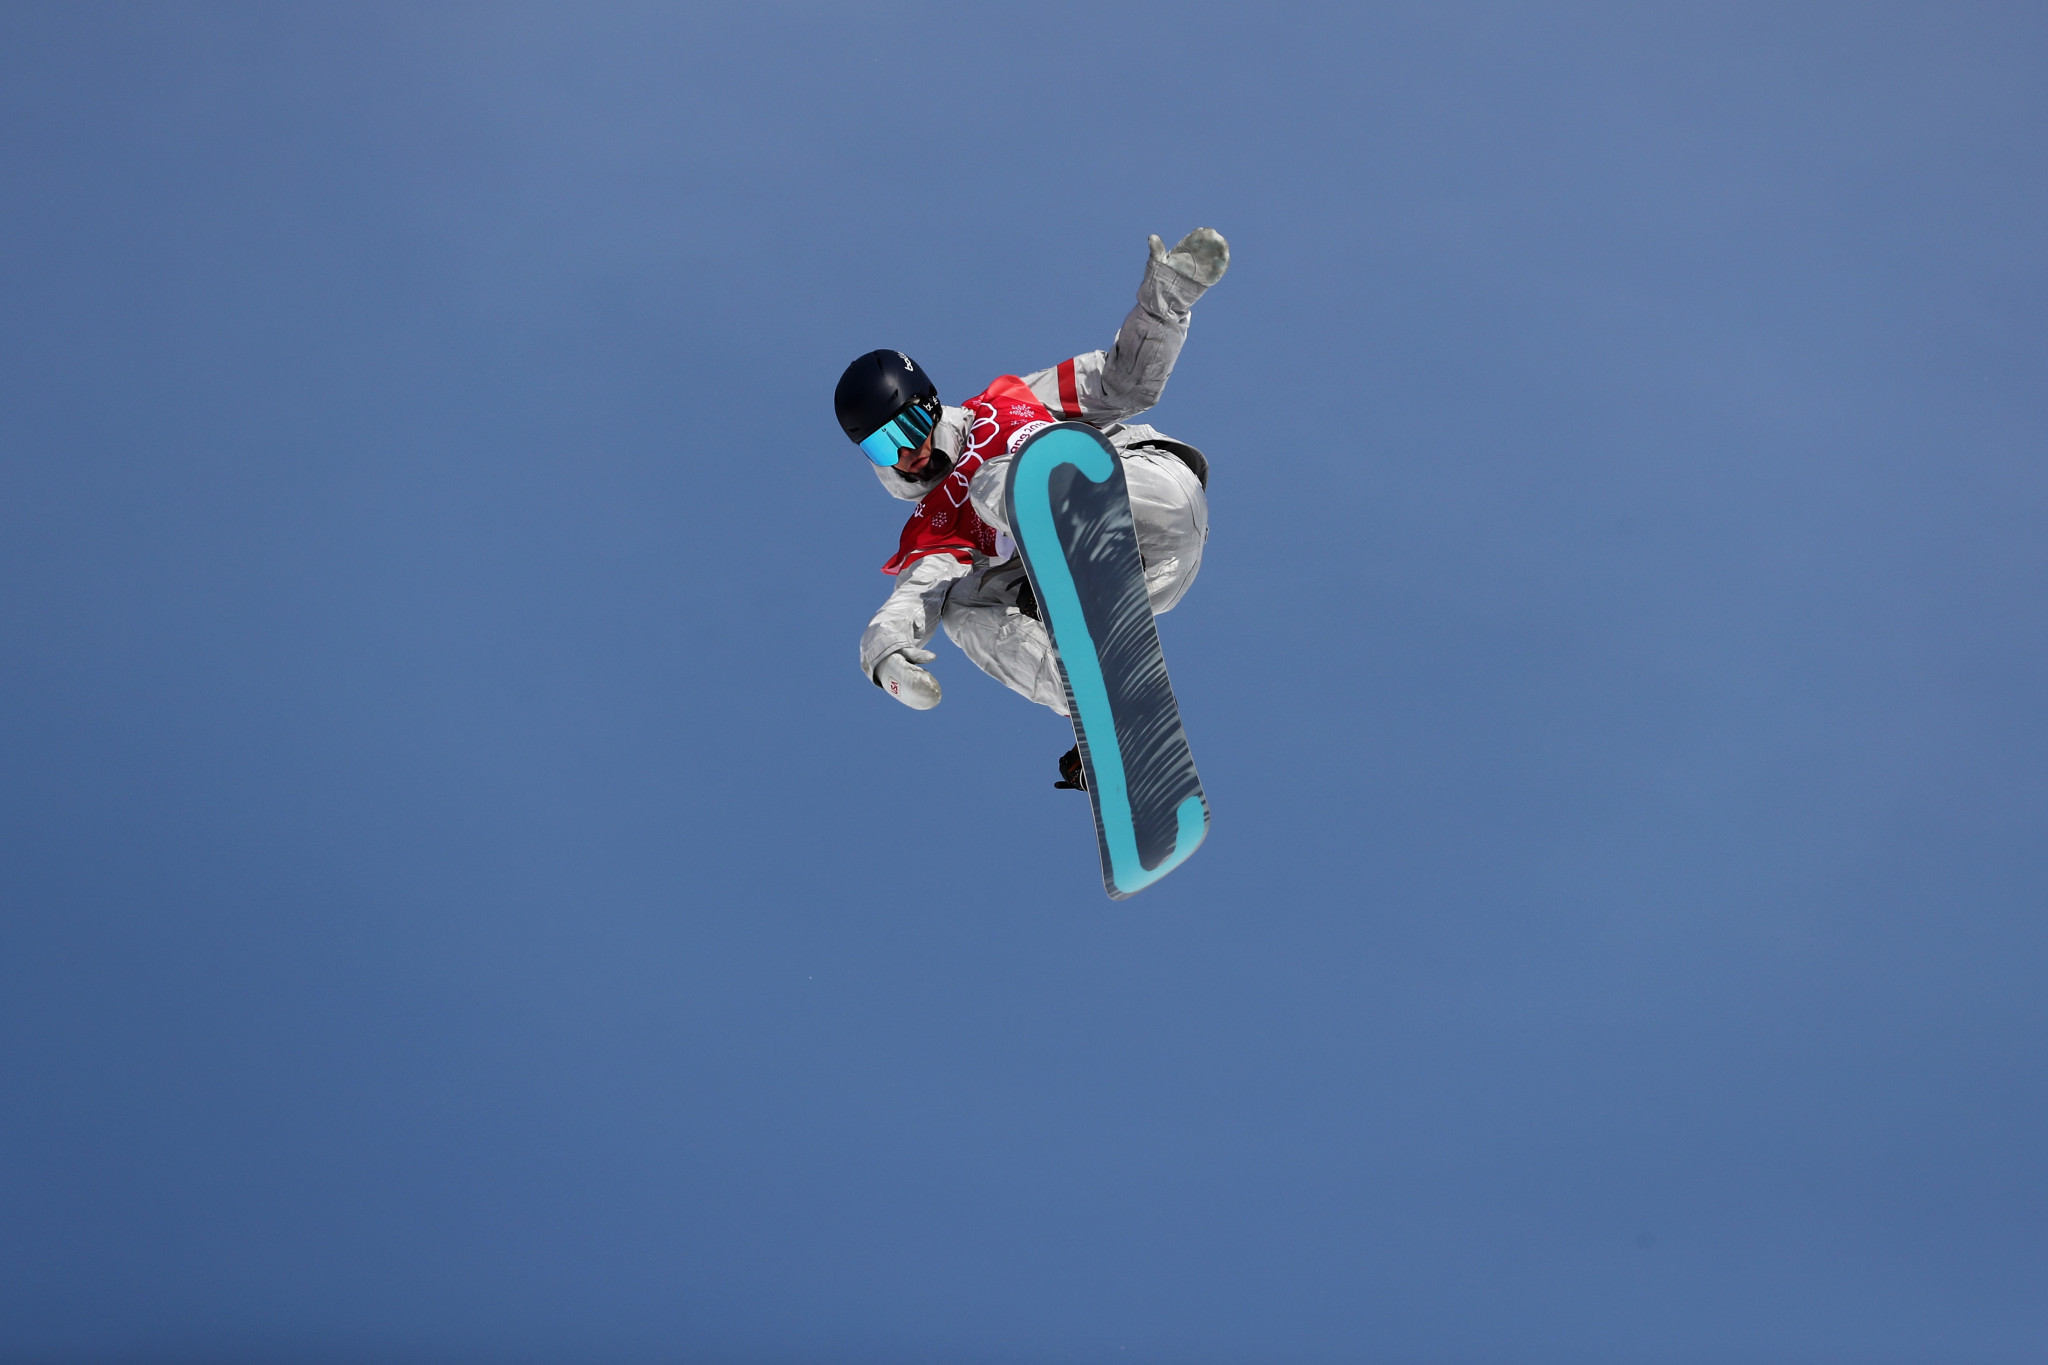 Former slopestyle world champion Ryan Stassel of the United States finished second in the men's qualifying event at the FIS Snowboard World Cup in Seiser Alm ©Getty Images